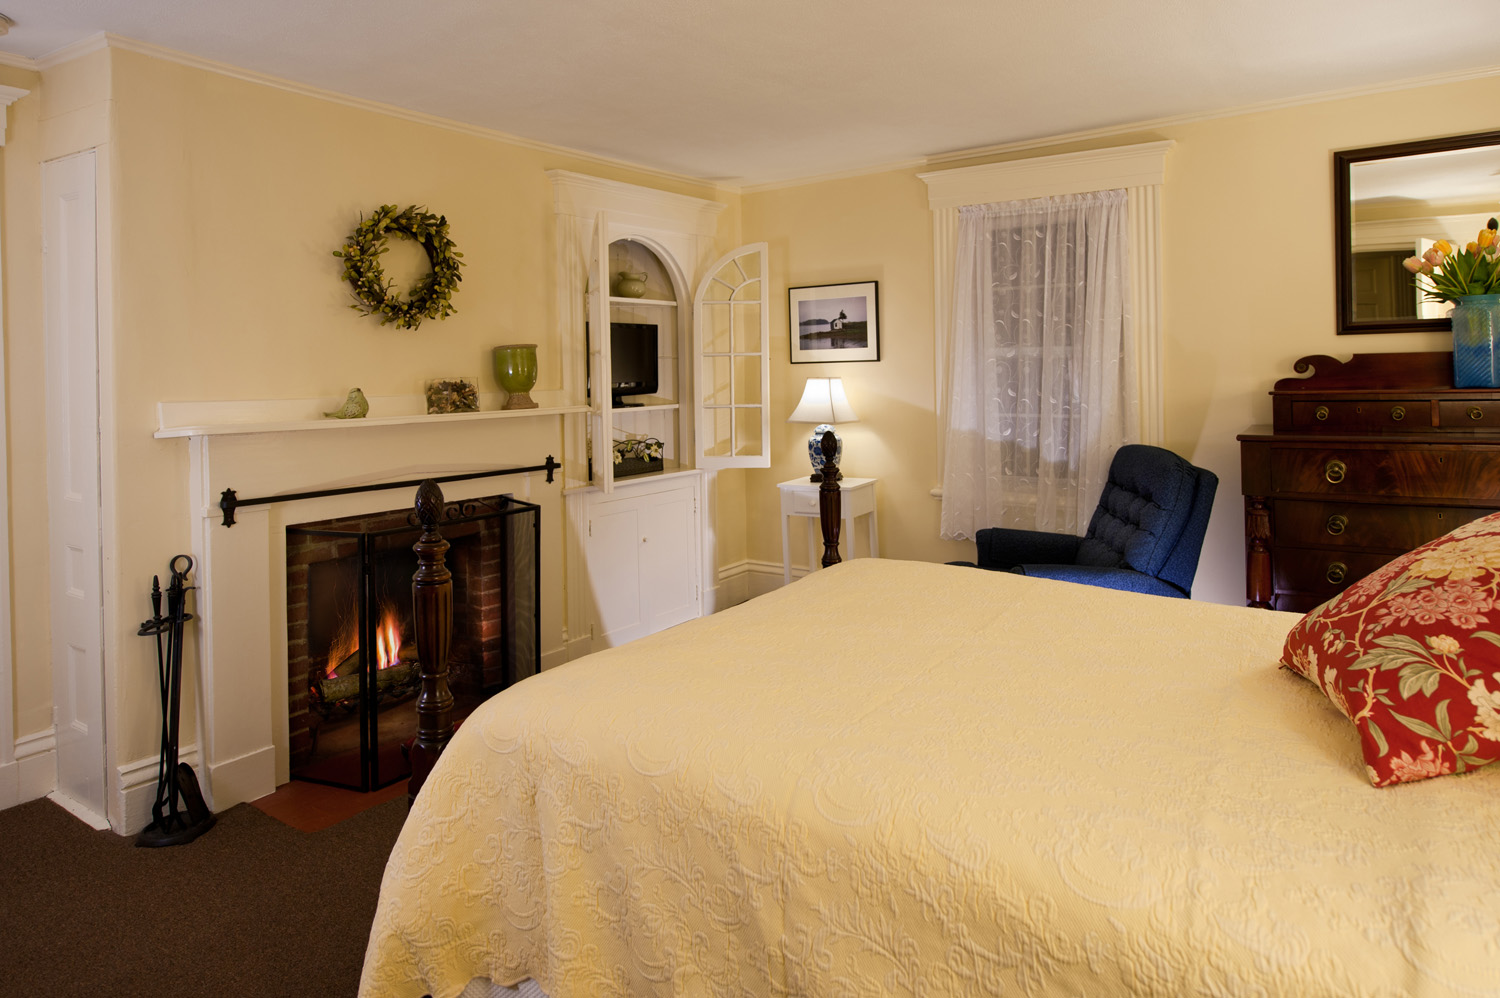 A yellow bedroom with bed with yellow bedspread and red floral pillow, a fireplace with log fire, and blue chair.